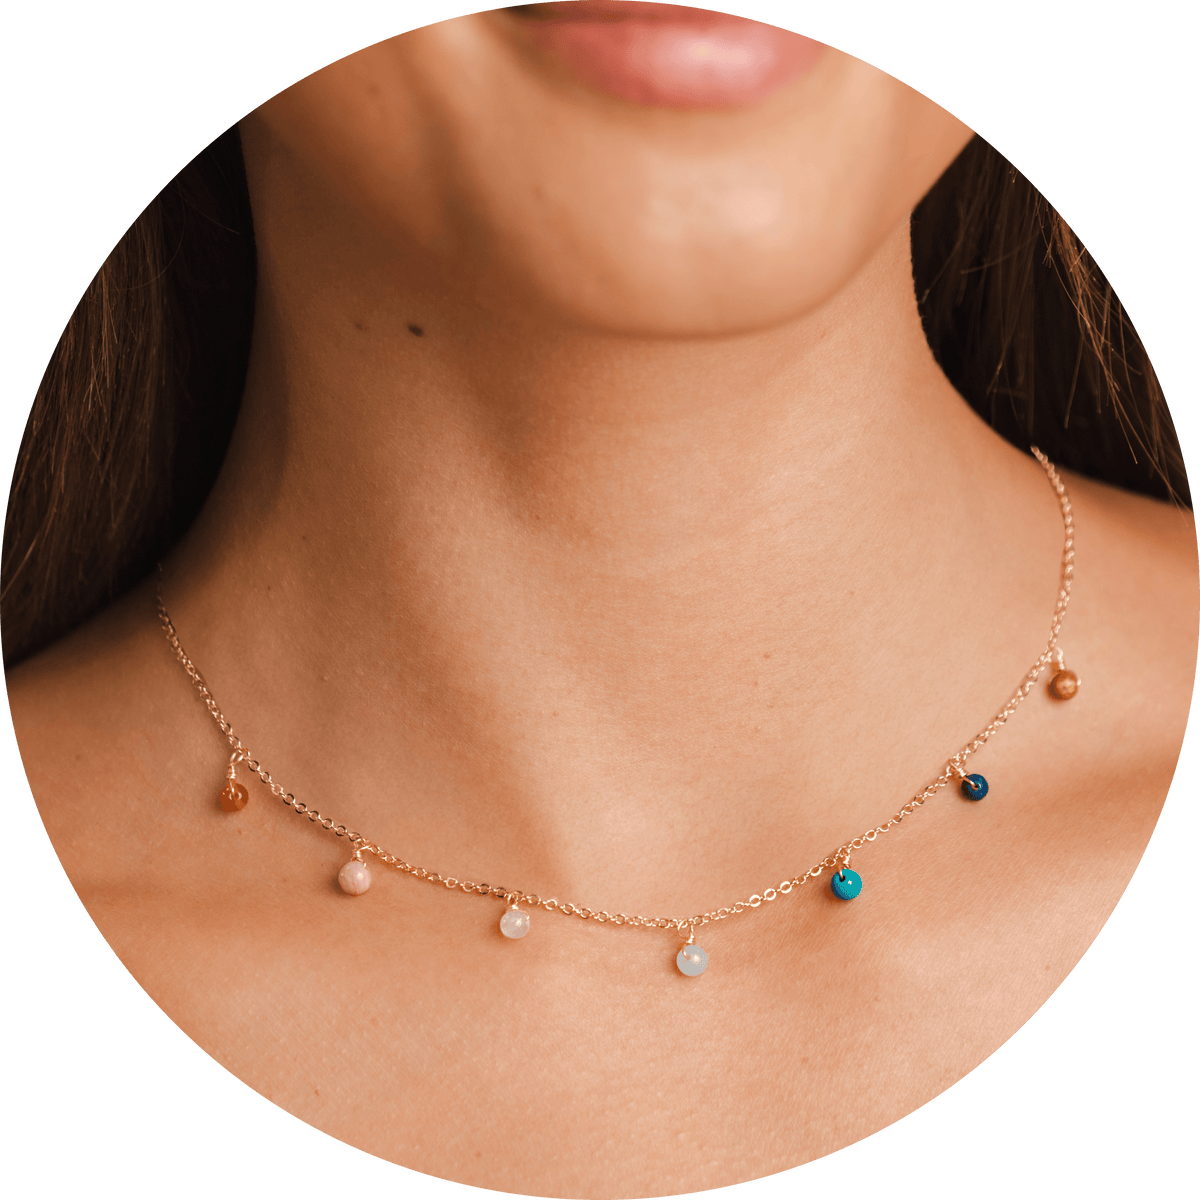 Dewdrop charm necklace with multicolor stones and a gold chain